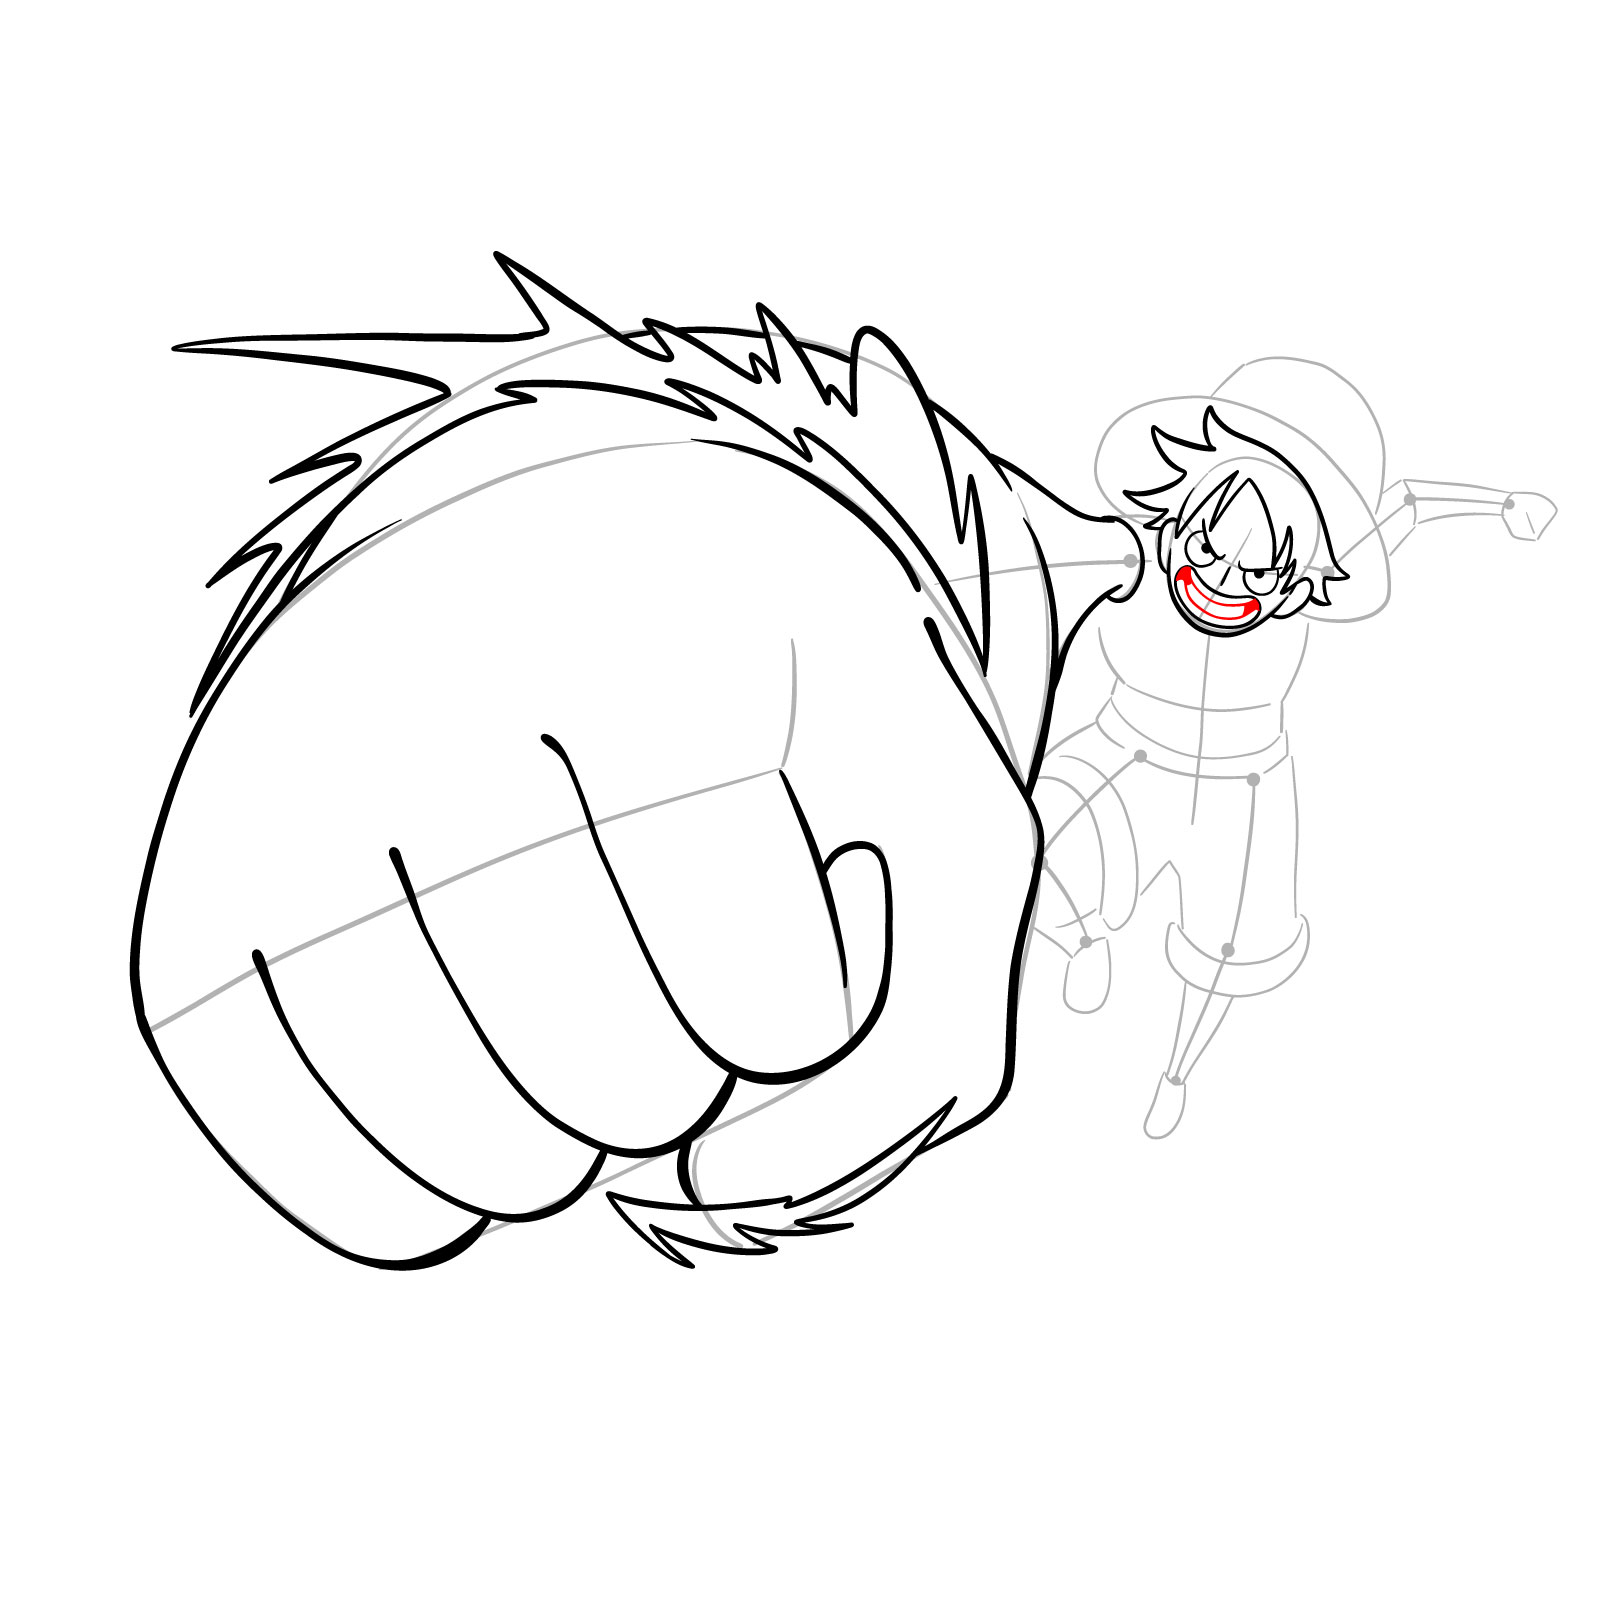 How to draw Luffy's Gear 3 without haki - step 20